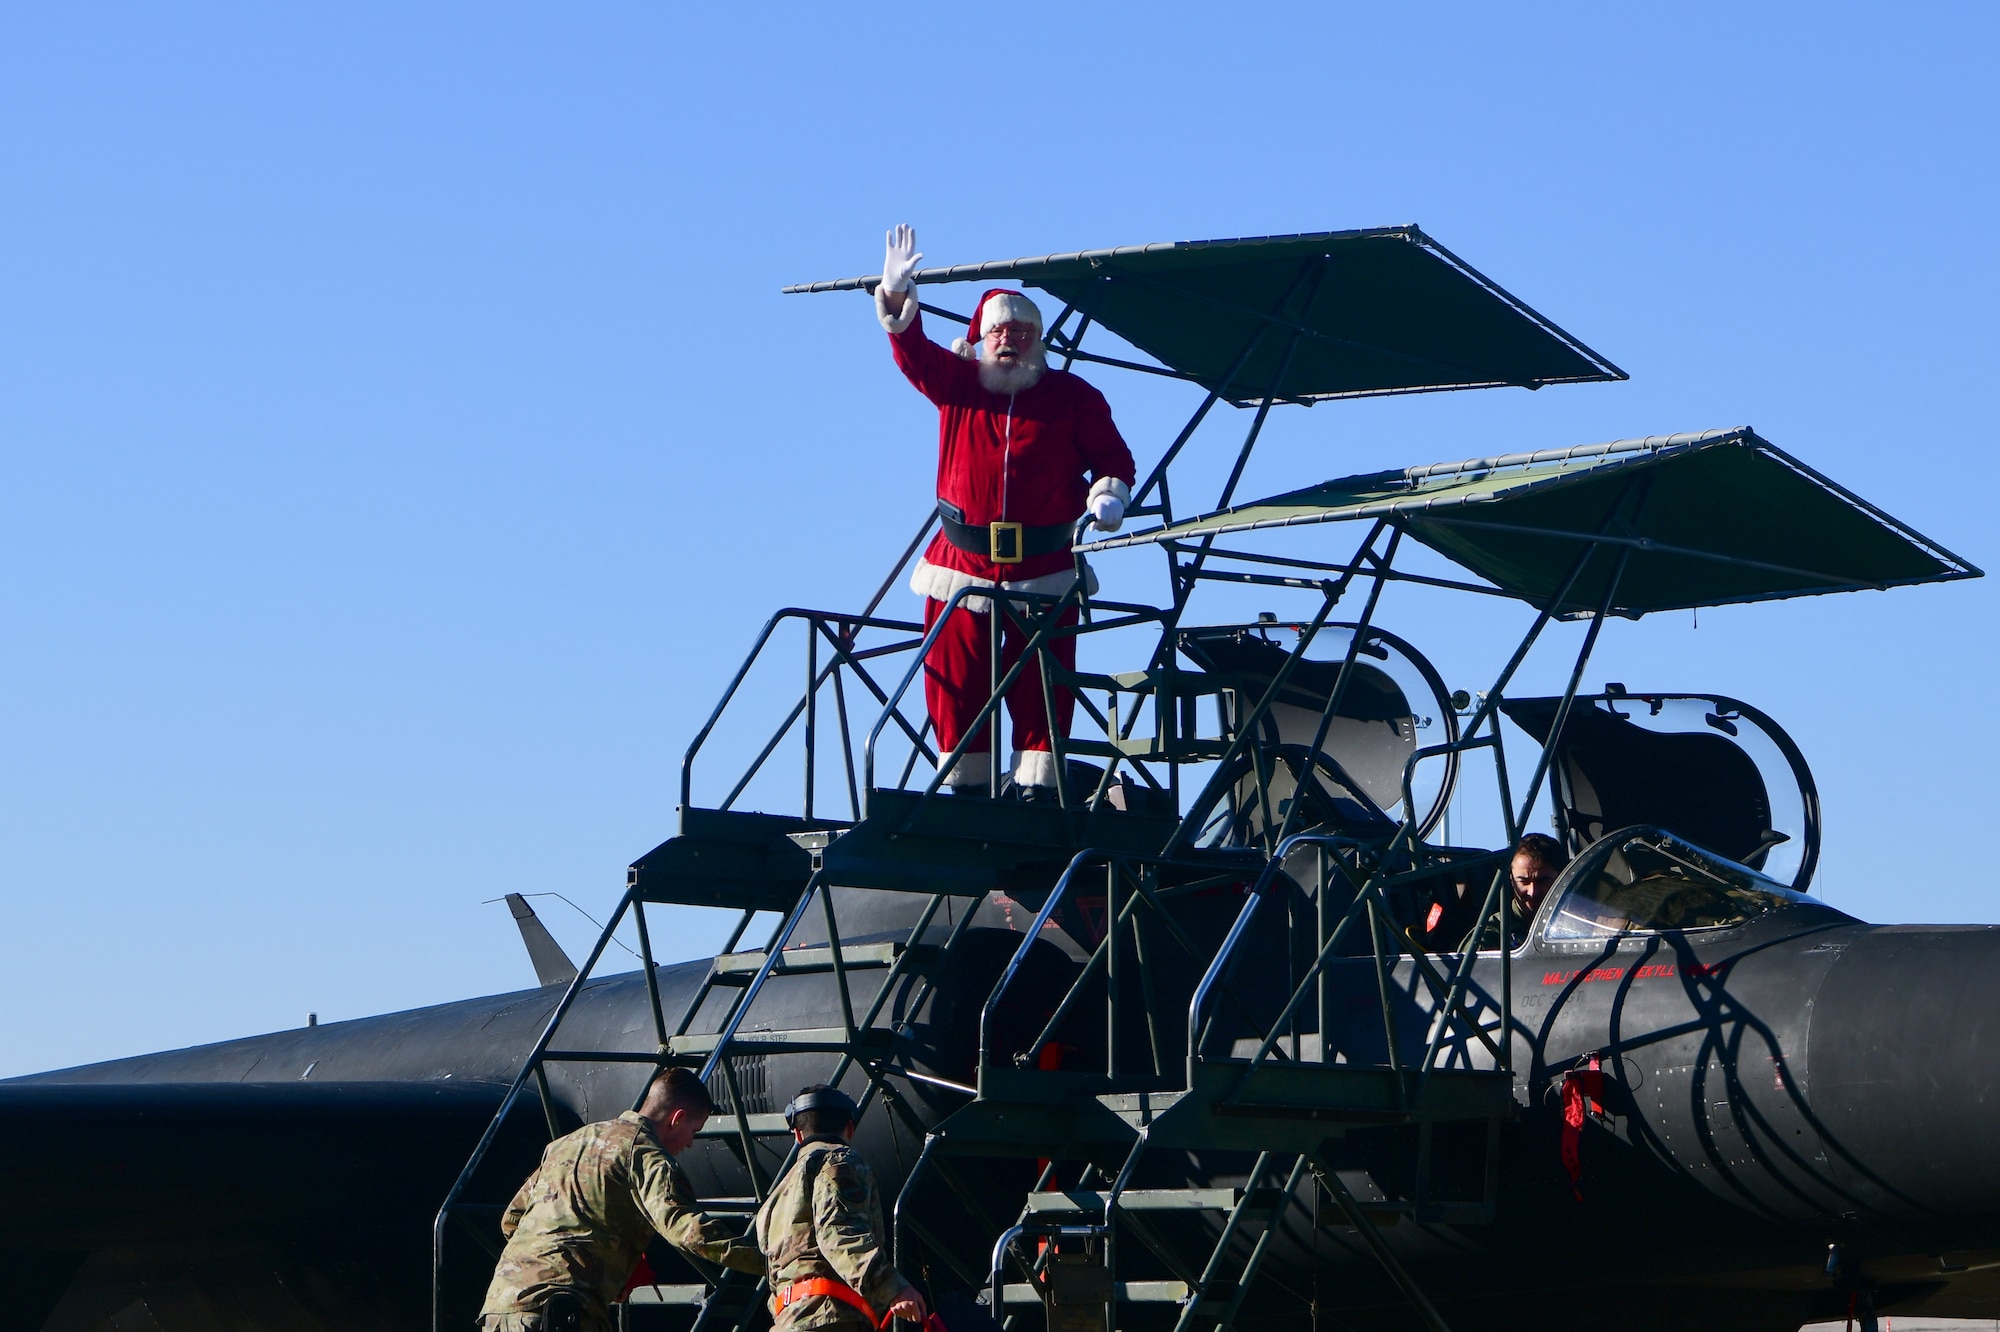 Santa taxis in on the U-2 Dragon Lady on the flightline at Beale Air Force Base, Calif. on Dec. 17, 2022.